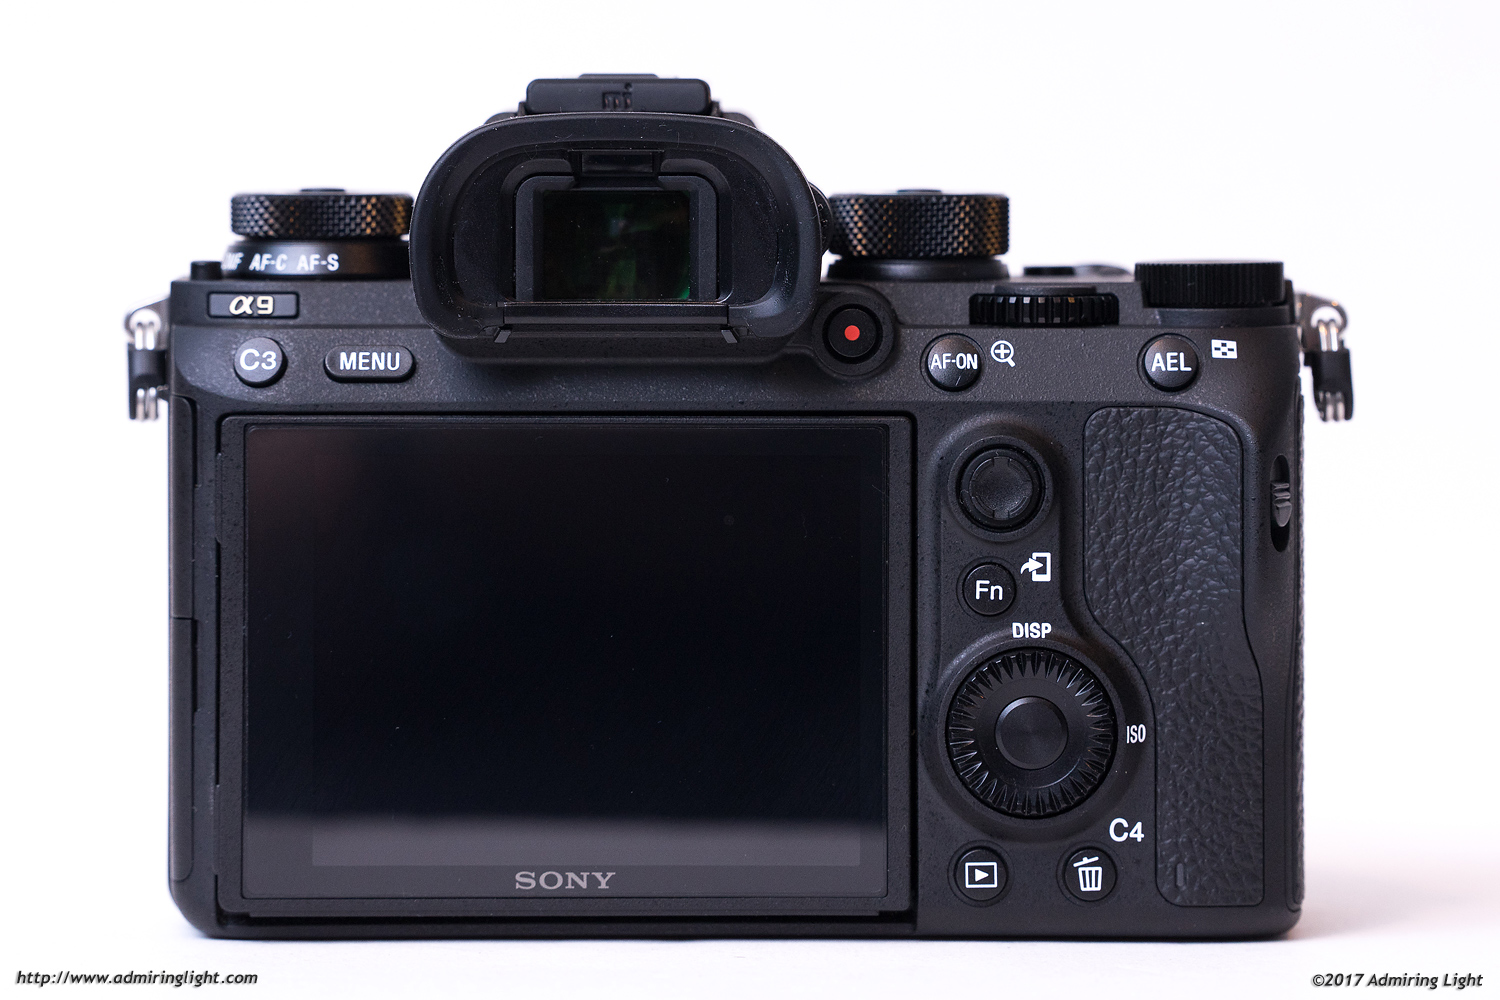 The rear of the camera shows some of the new controls on the A9